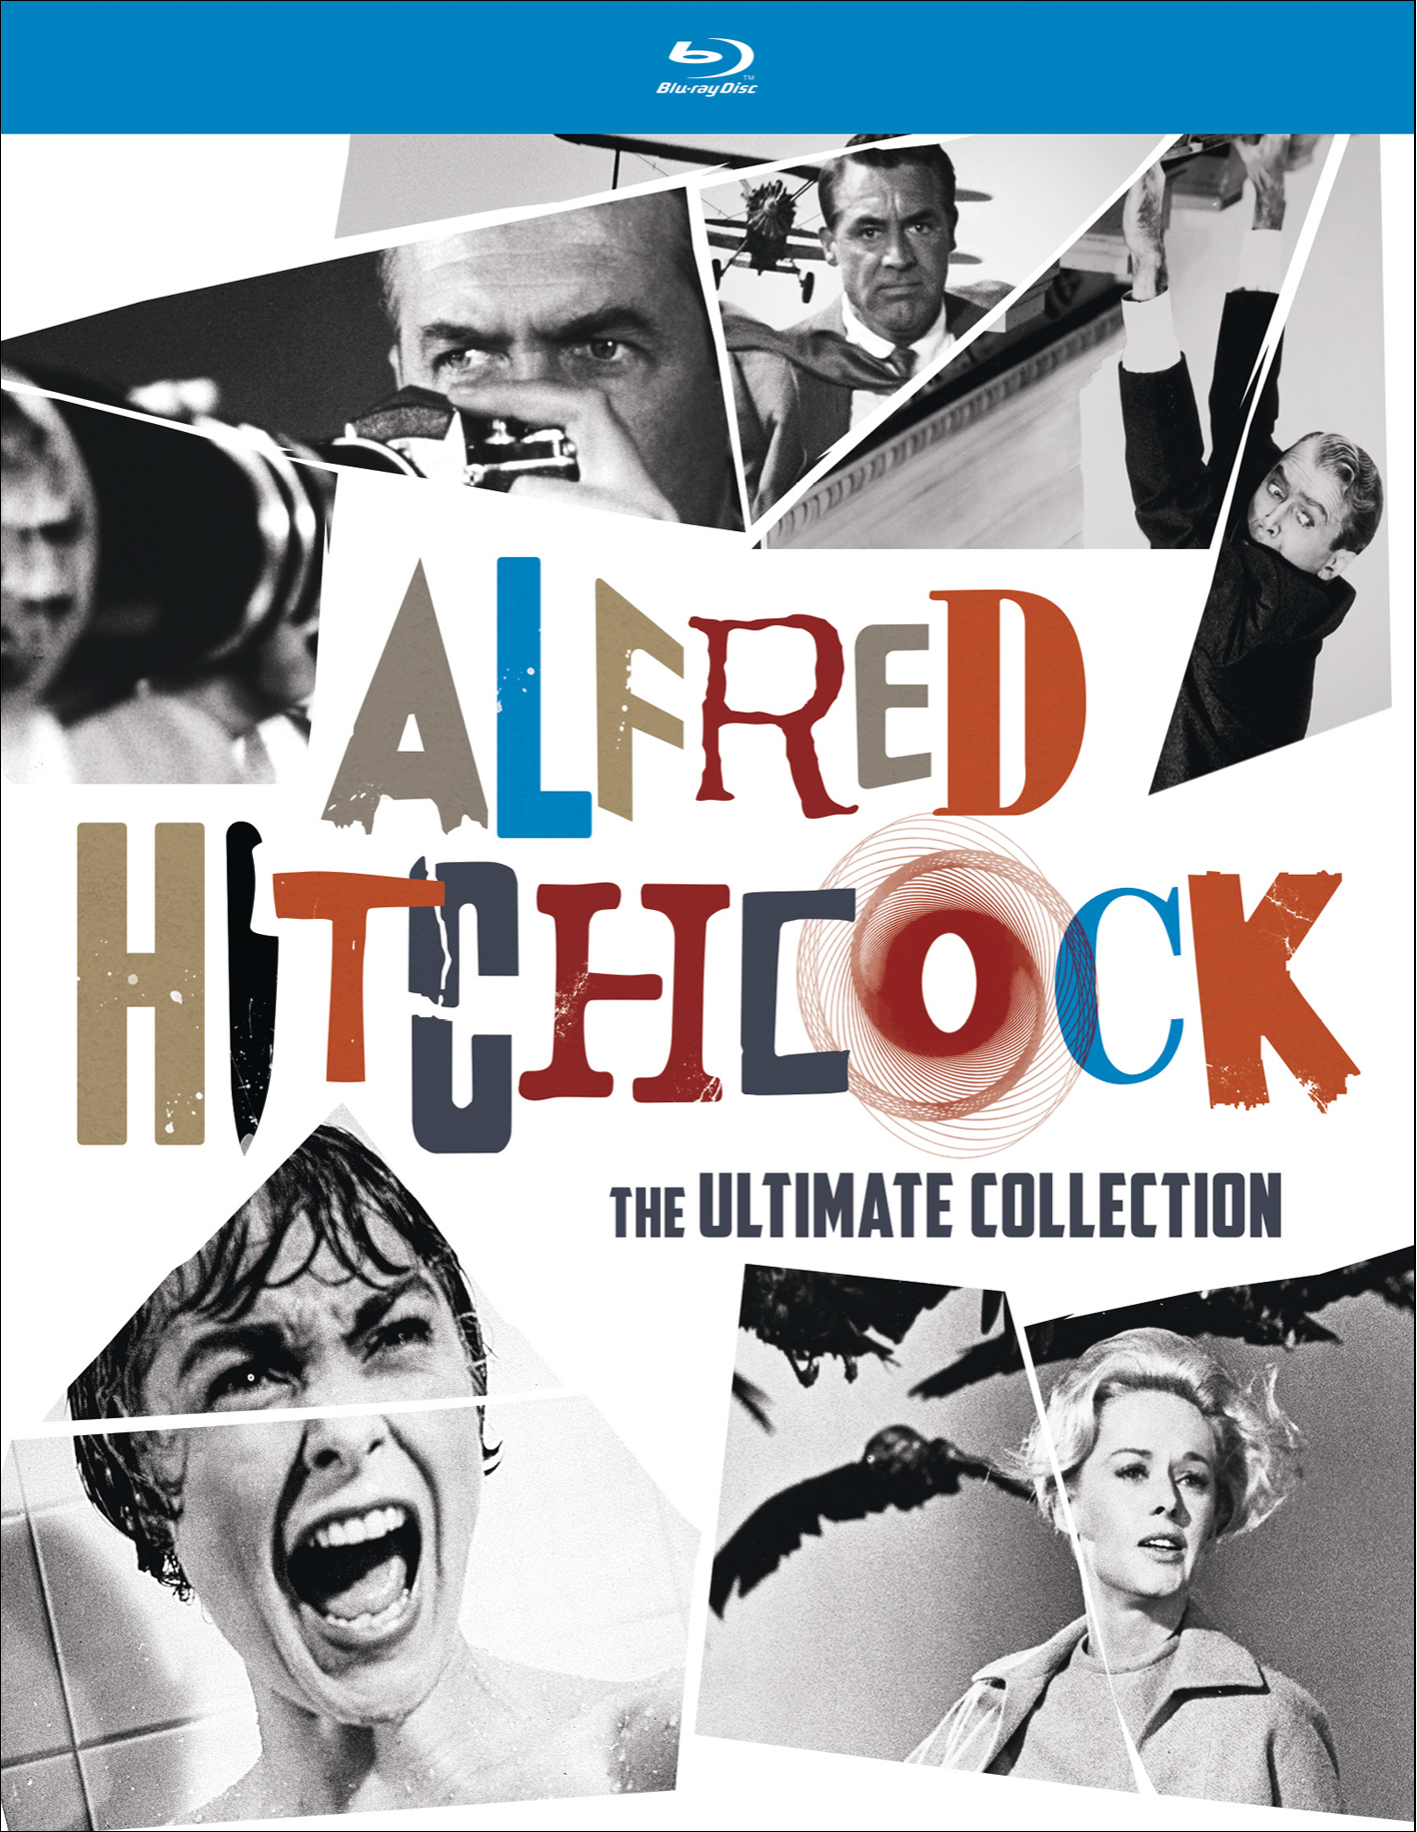 Alfred Hitchcock: The Ultimate Collection - Blu-ray   - Drama Movies On Blu-ray - Movies On GRUV